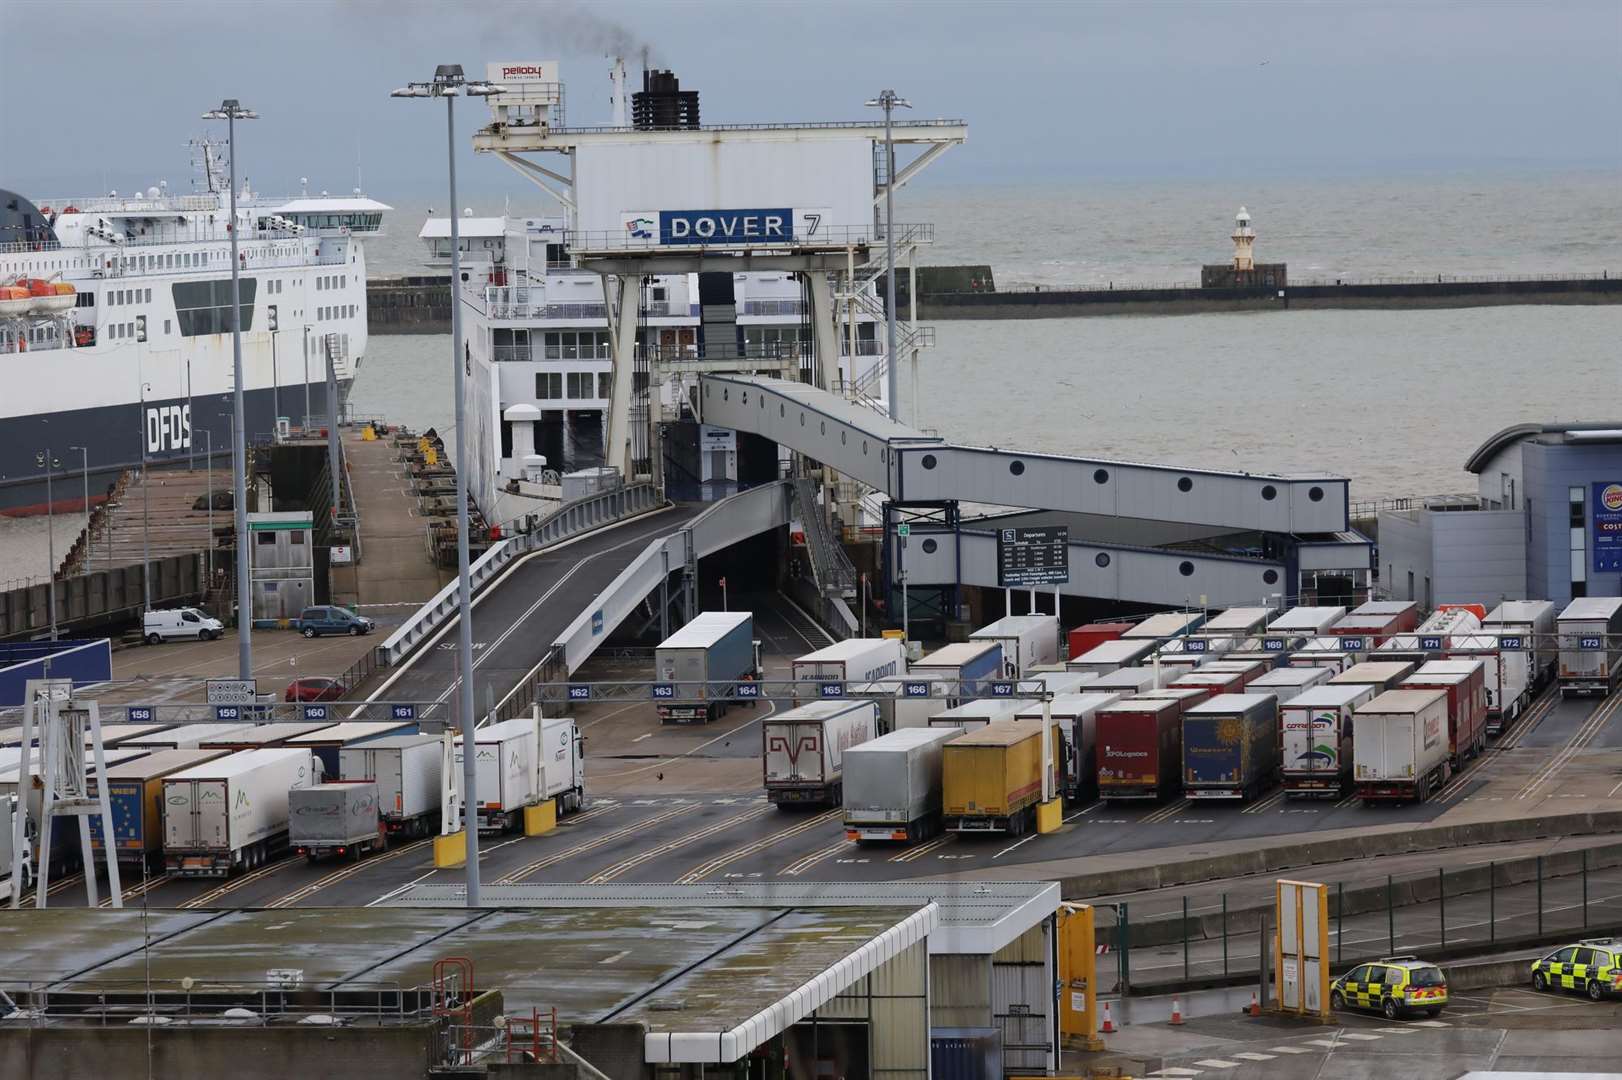 Will we see a repeat of the pre-Christmas chaos in Dover soon? . Photo: UKNIP